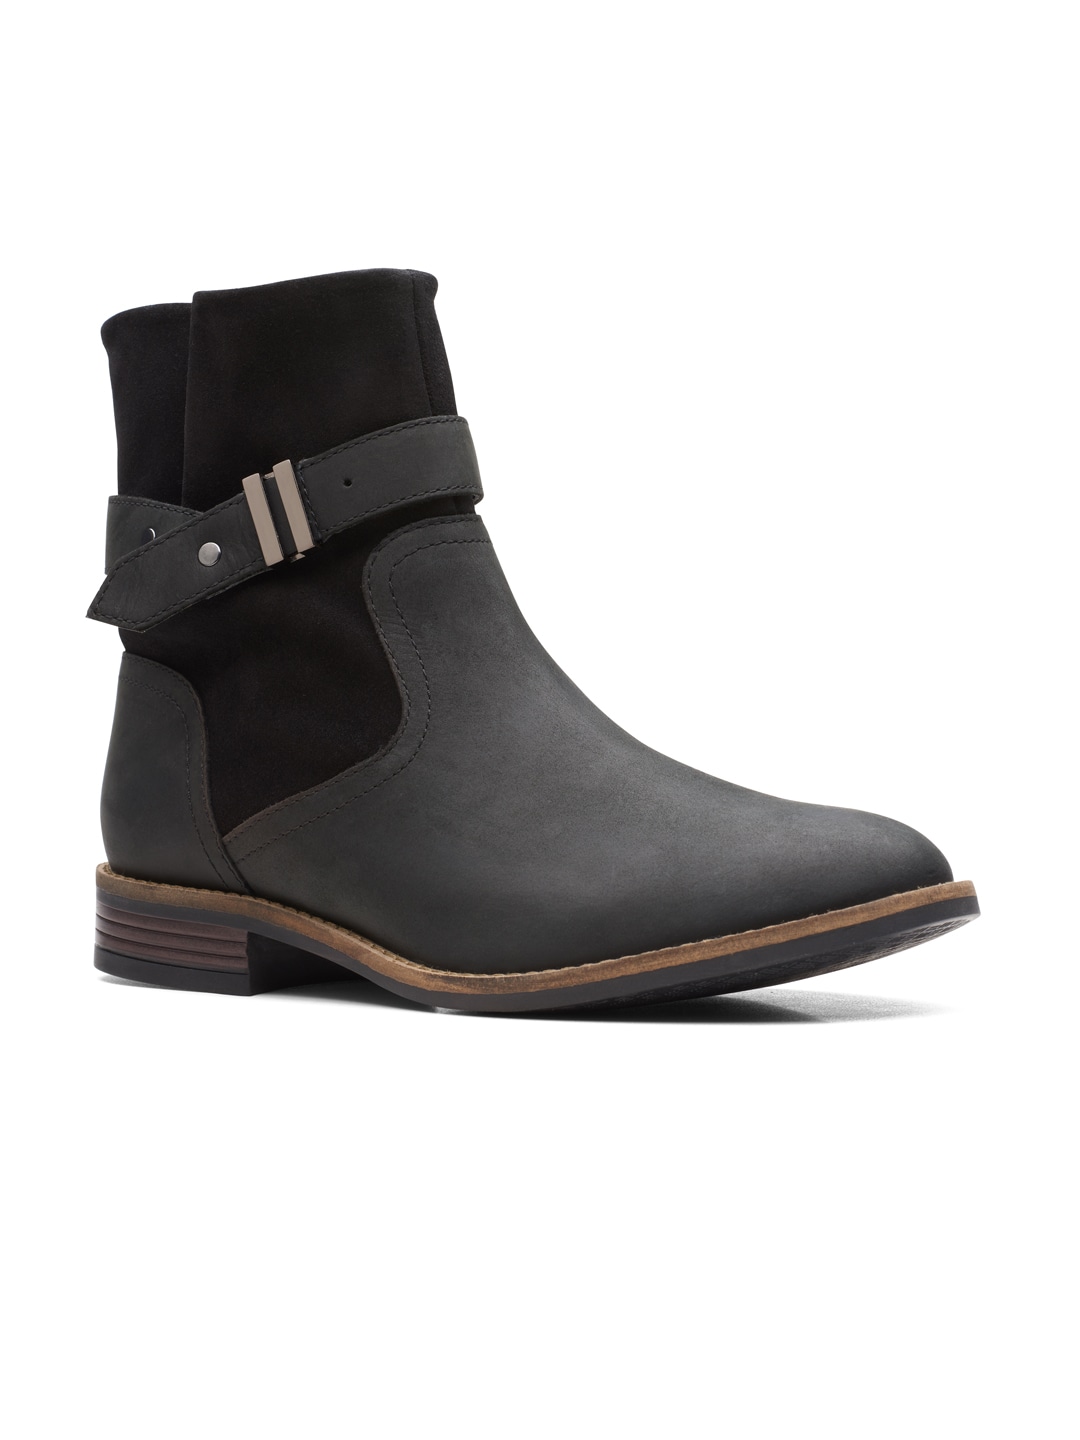 Clarks Women Black Camzin Strap Leather High-Top Boots Price in India